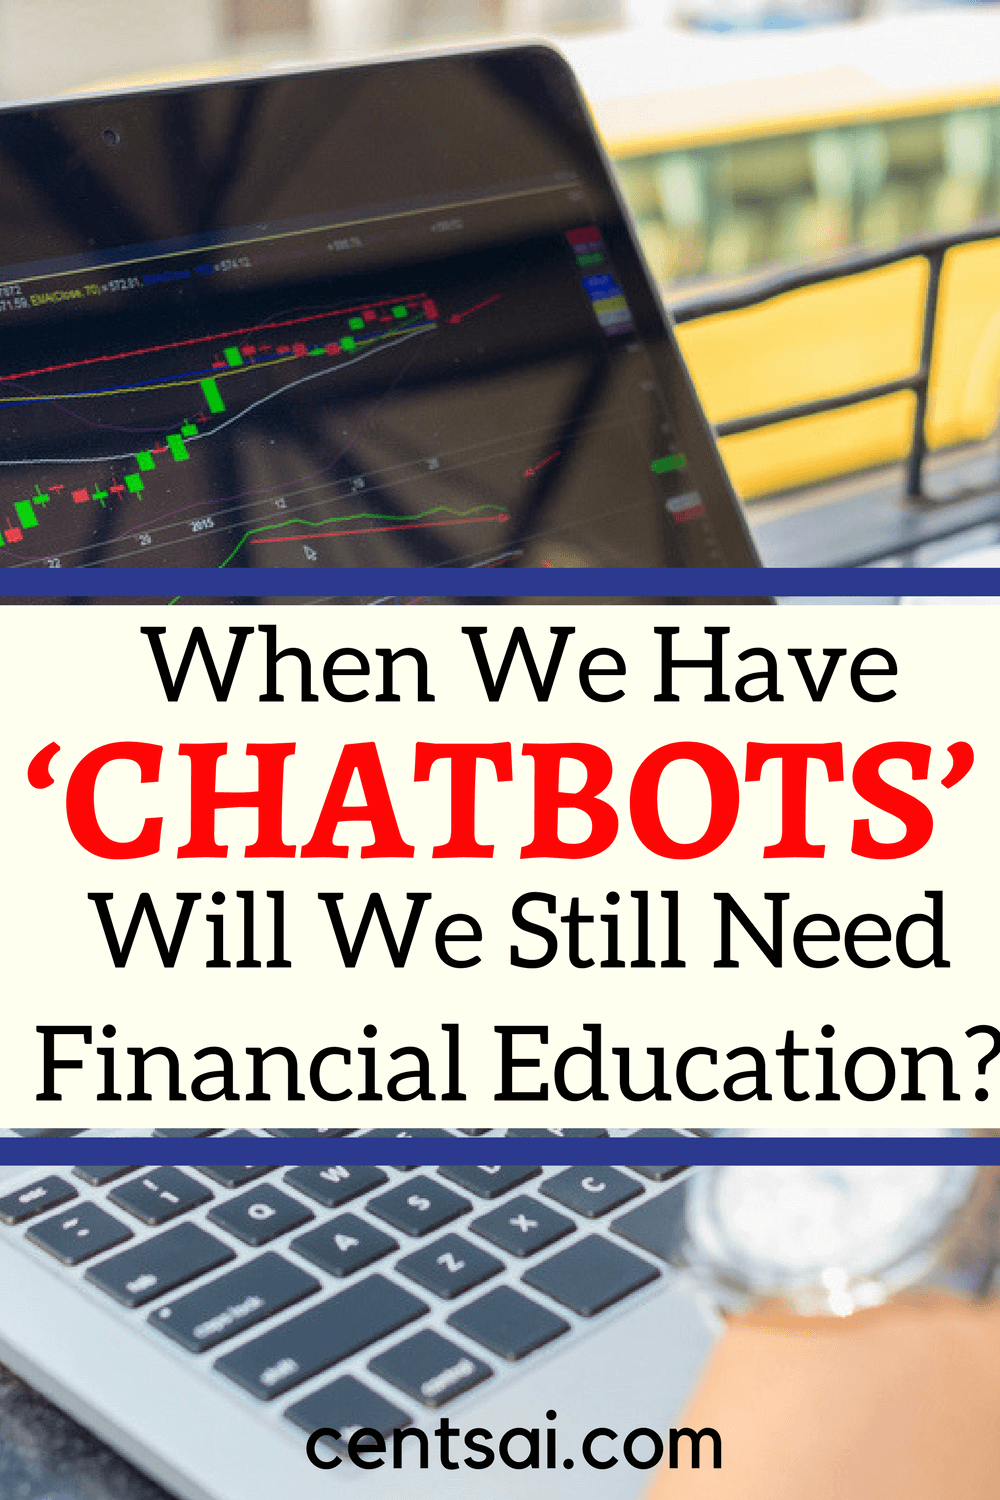 Technology is impacting financial literacy and how consumers interact with financial products - but is not a substitute for knowledge.